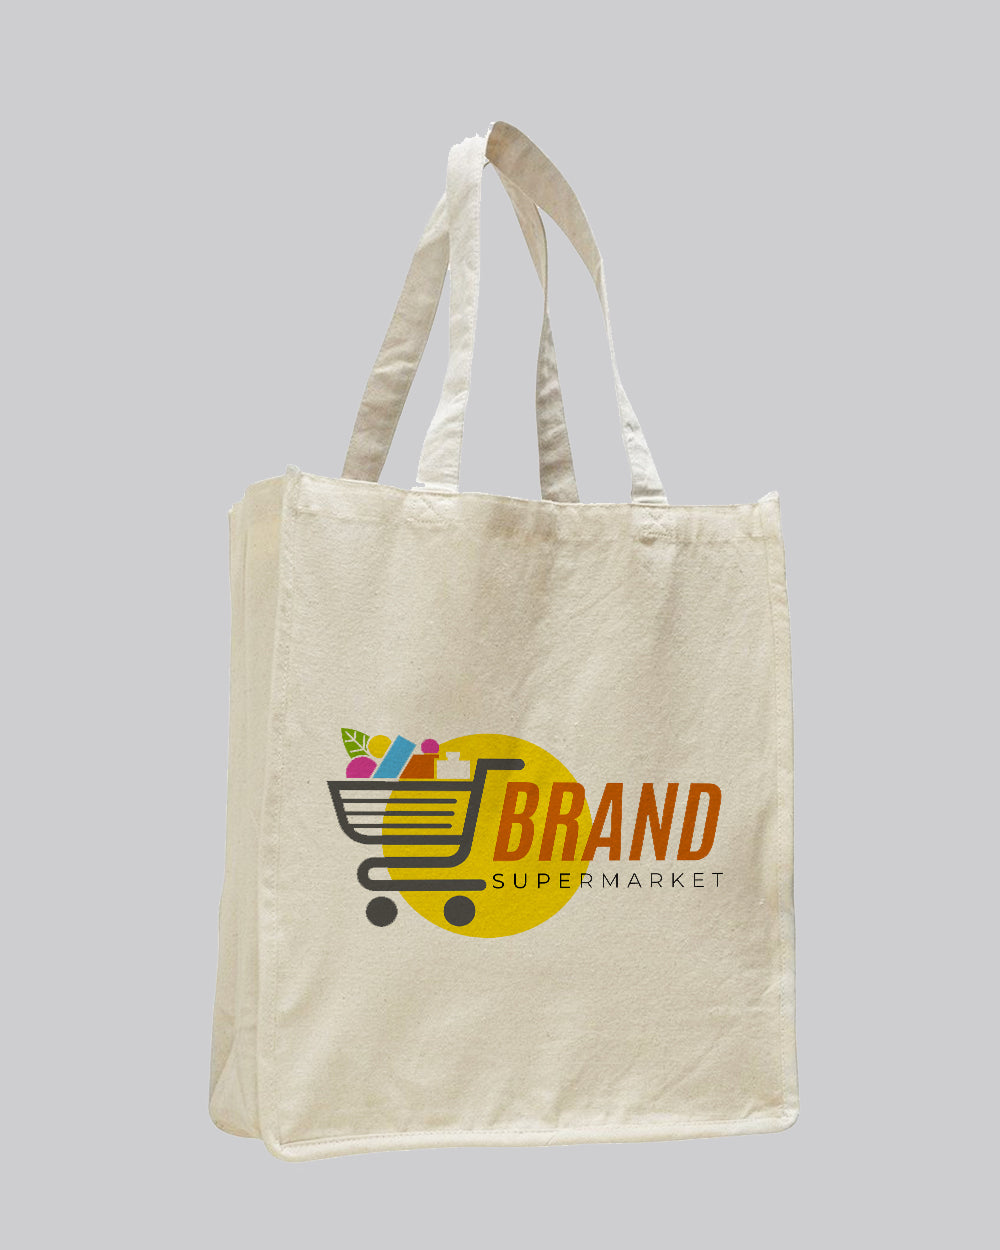 Printed Bags With Logo For Your Business Promotion | DY Printing Box